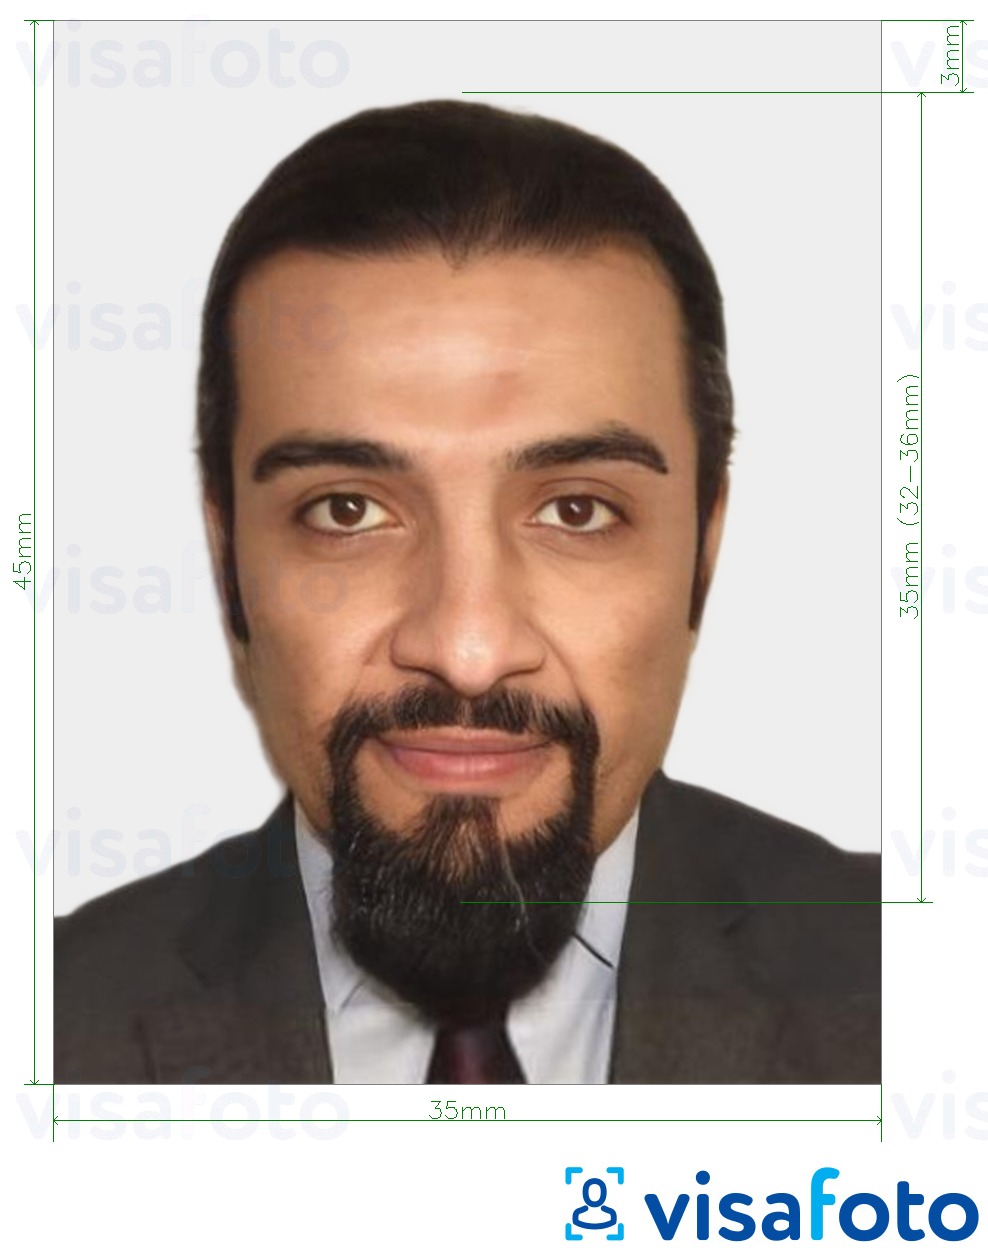 Example of photo for Morocco passport 35x45 mm (3.5x4.5 cm) with exact size specification